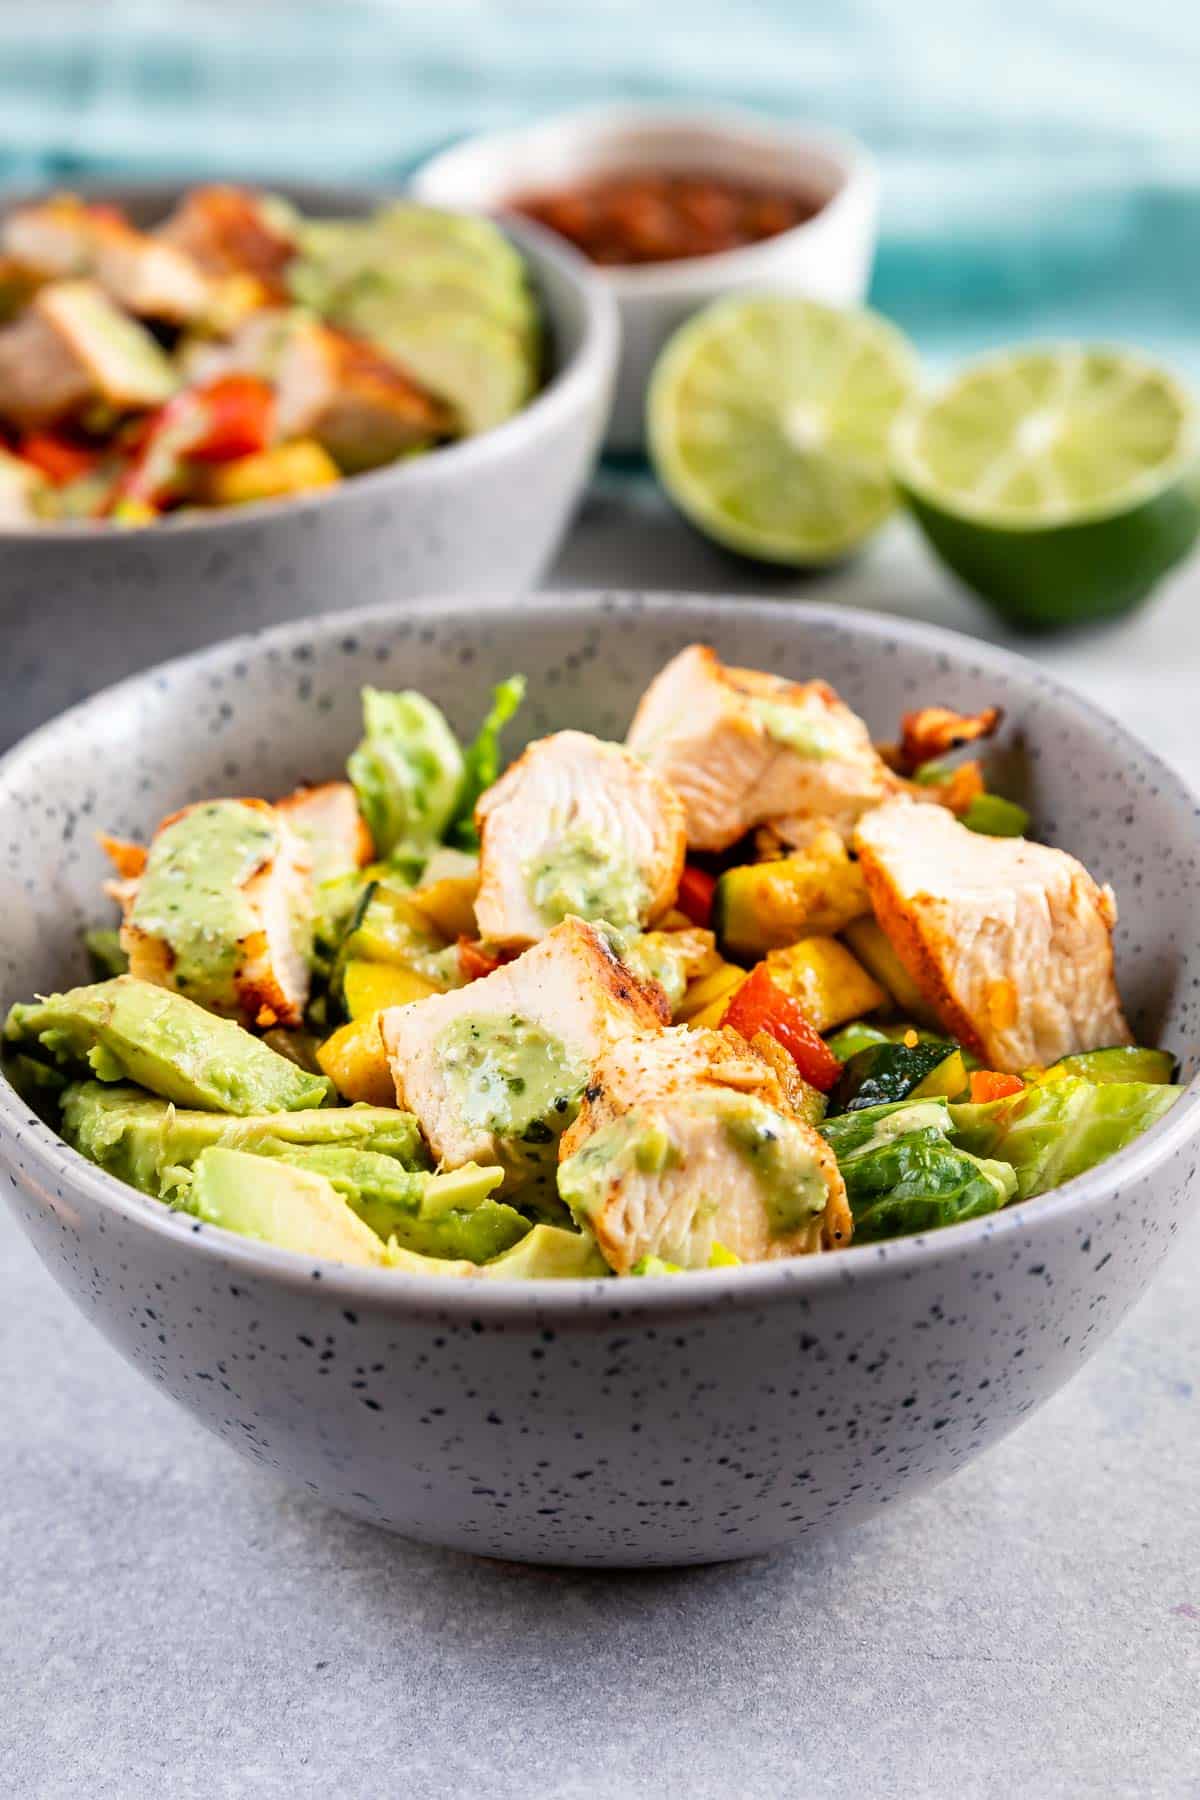 salad and chicken mixed together in a grey spotted bowl.